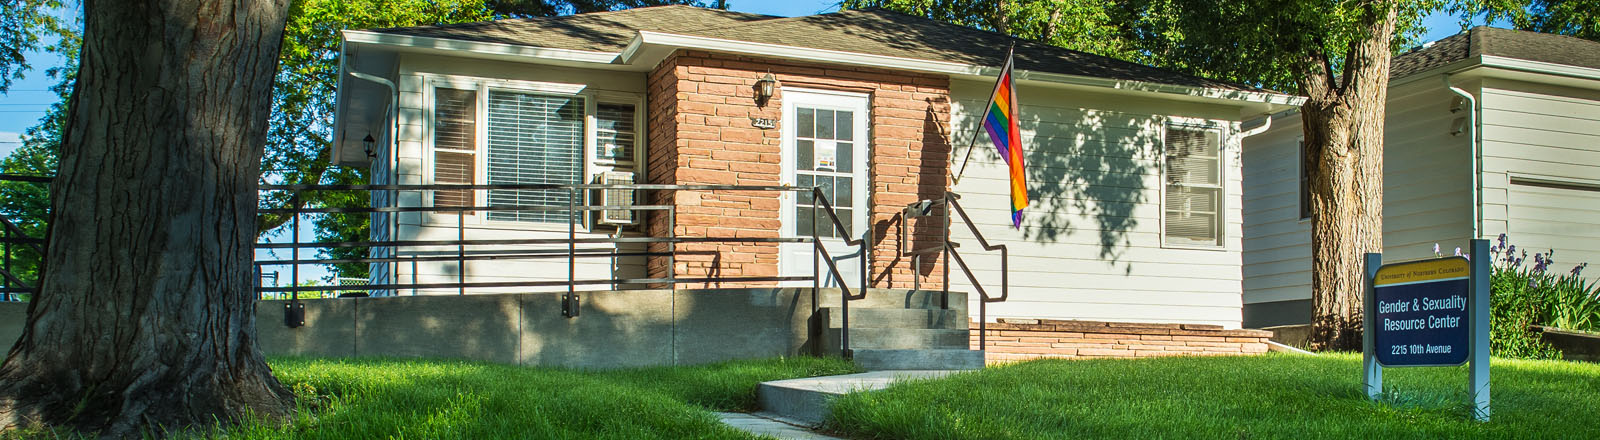 The Gender and Sexuality Resource Center